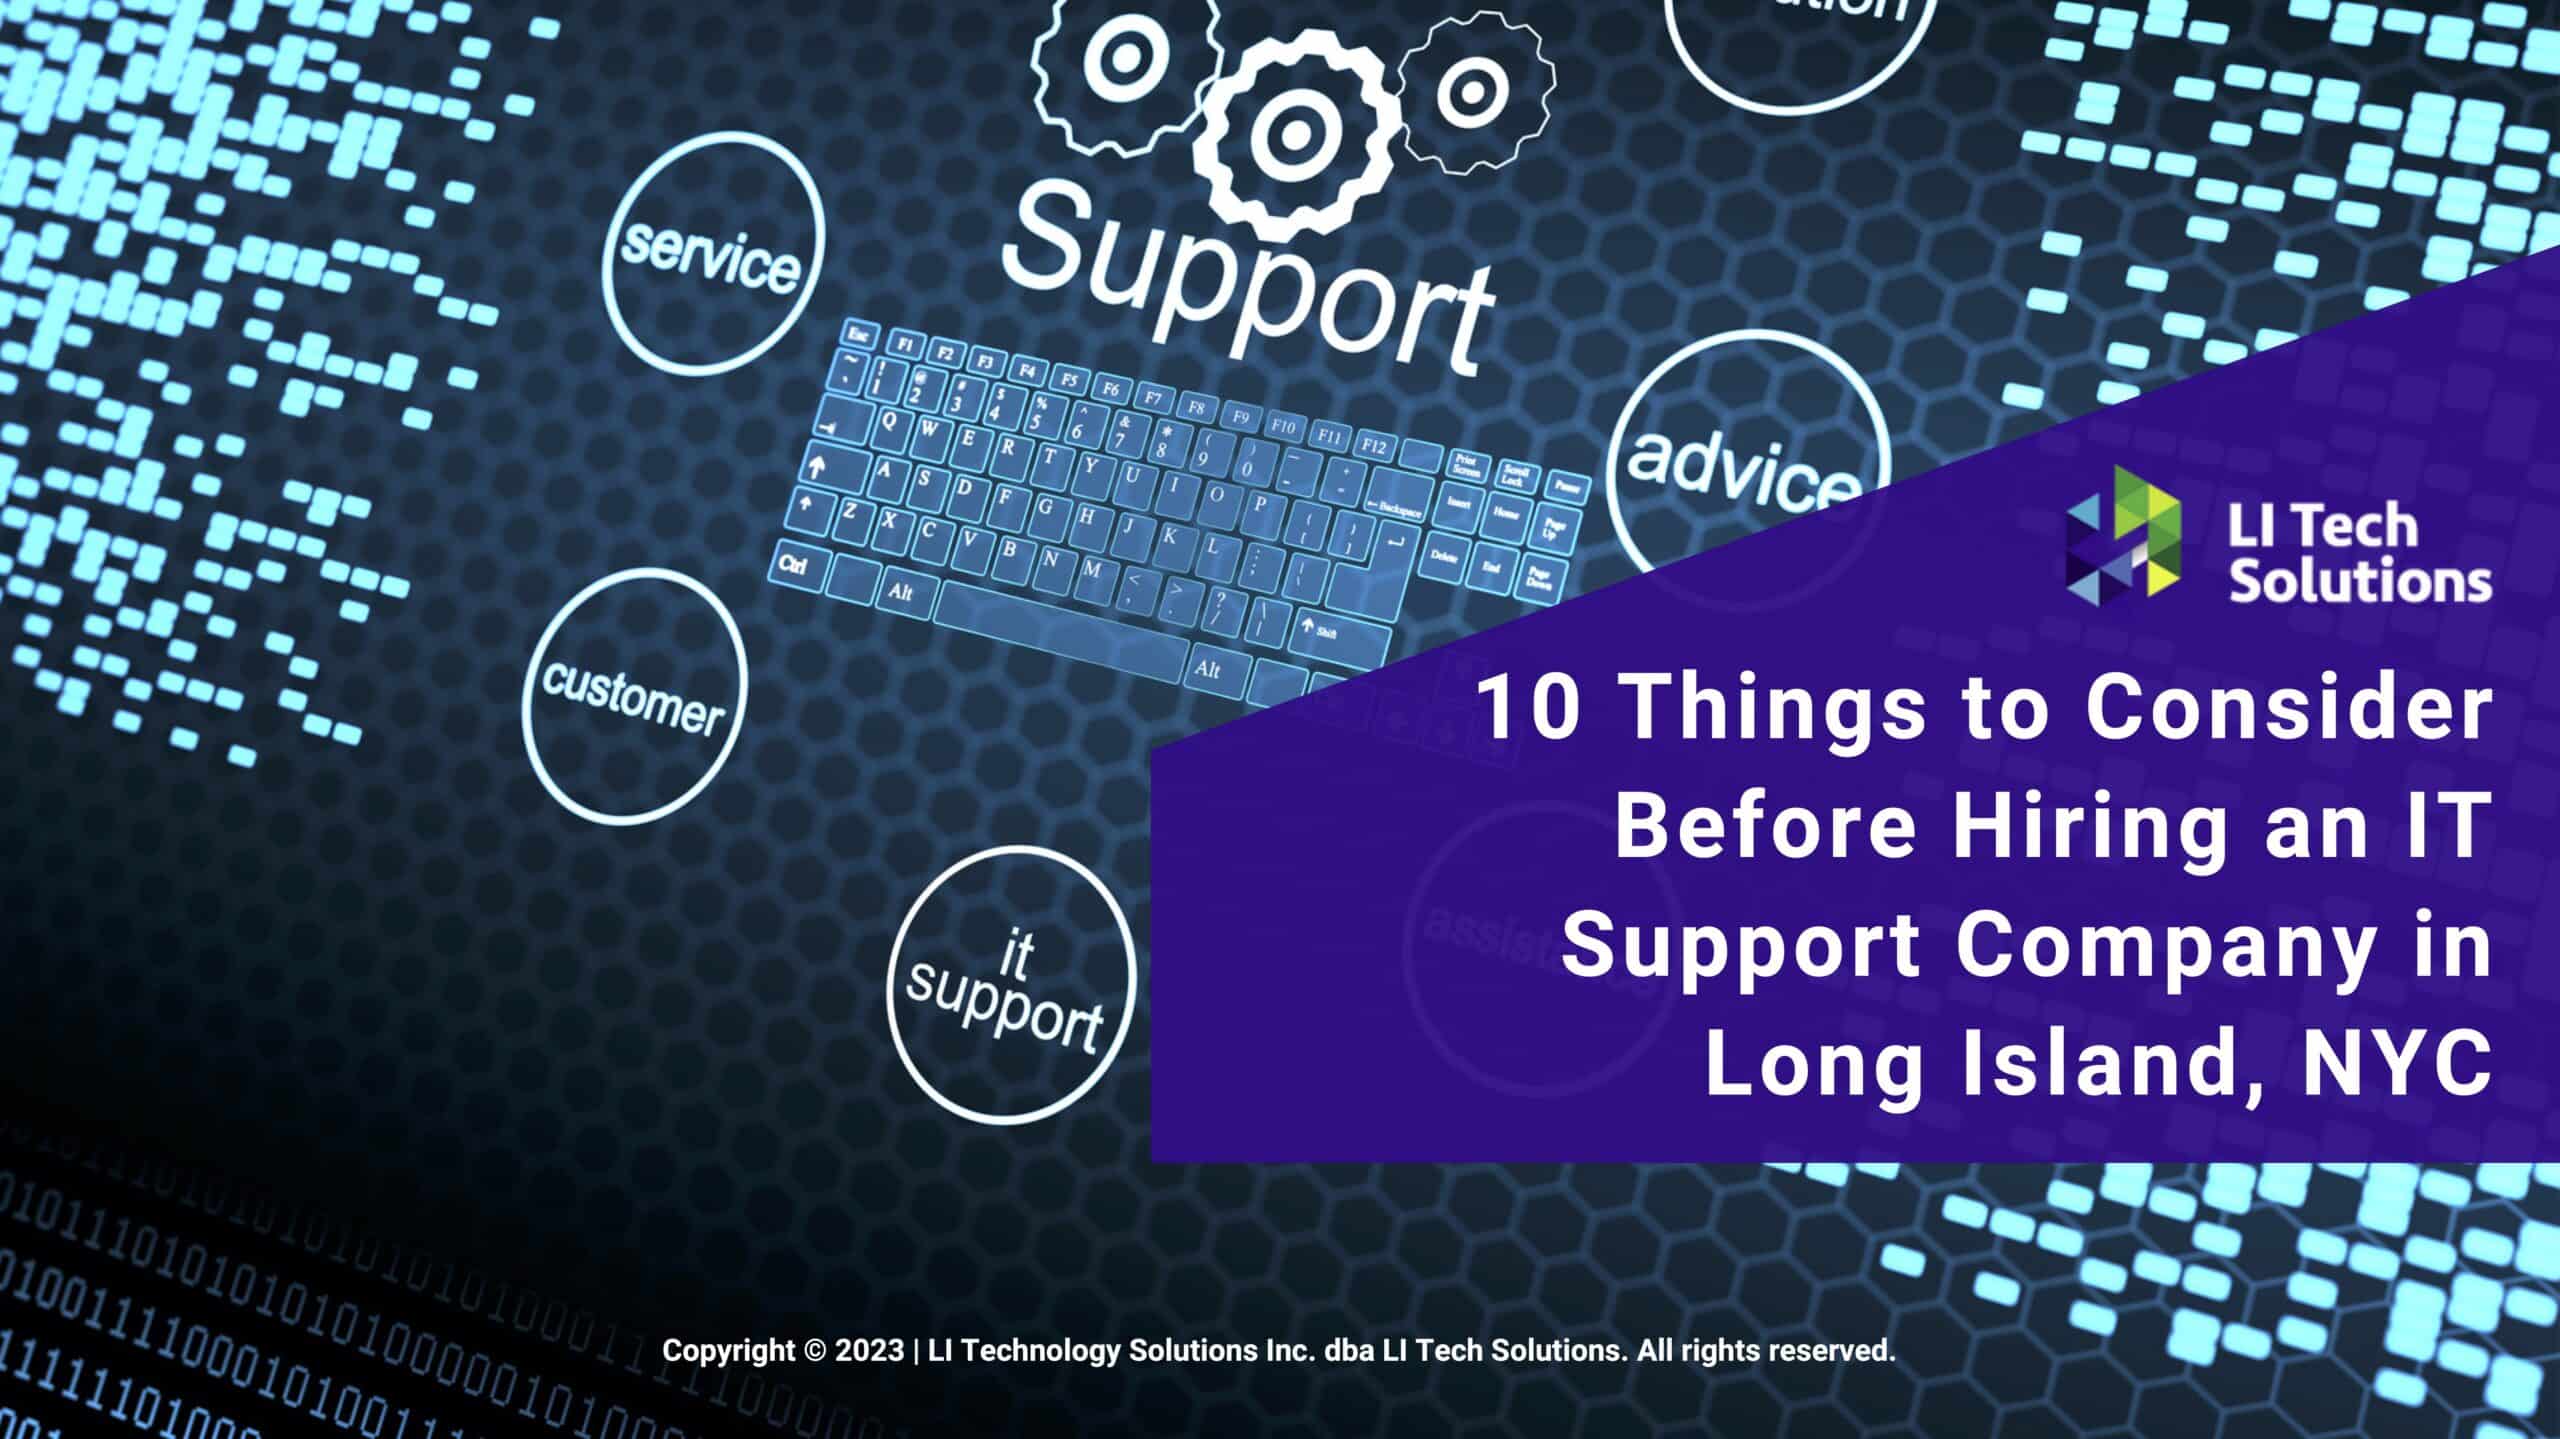 Featured: IT support abstract- 10 Things to consider before hiring an IT support company in Long Island, NYC